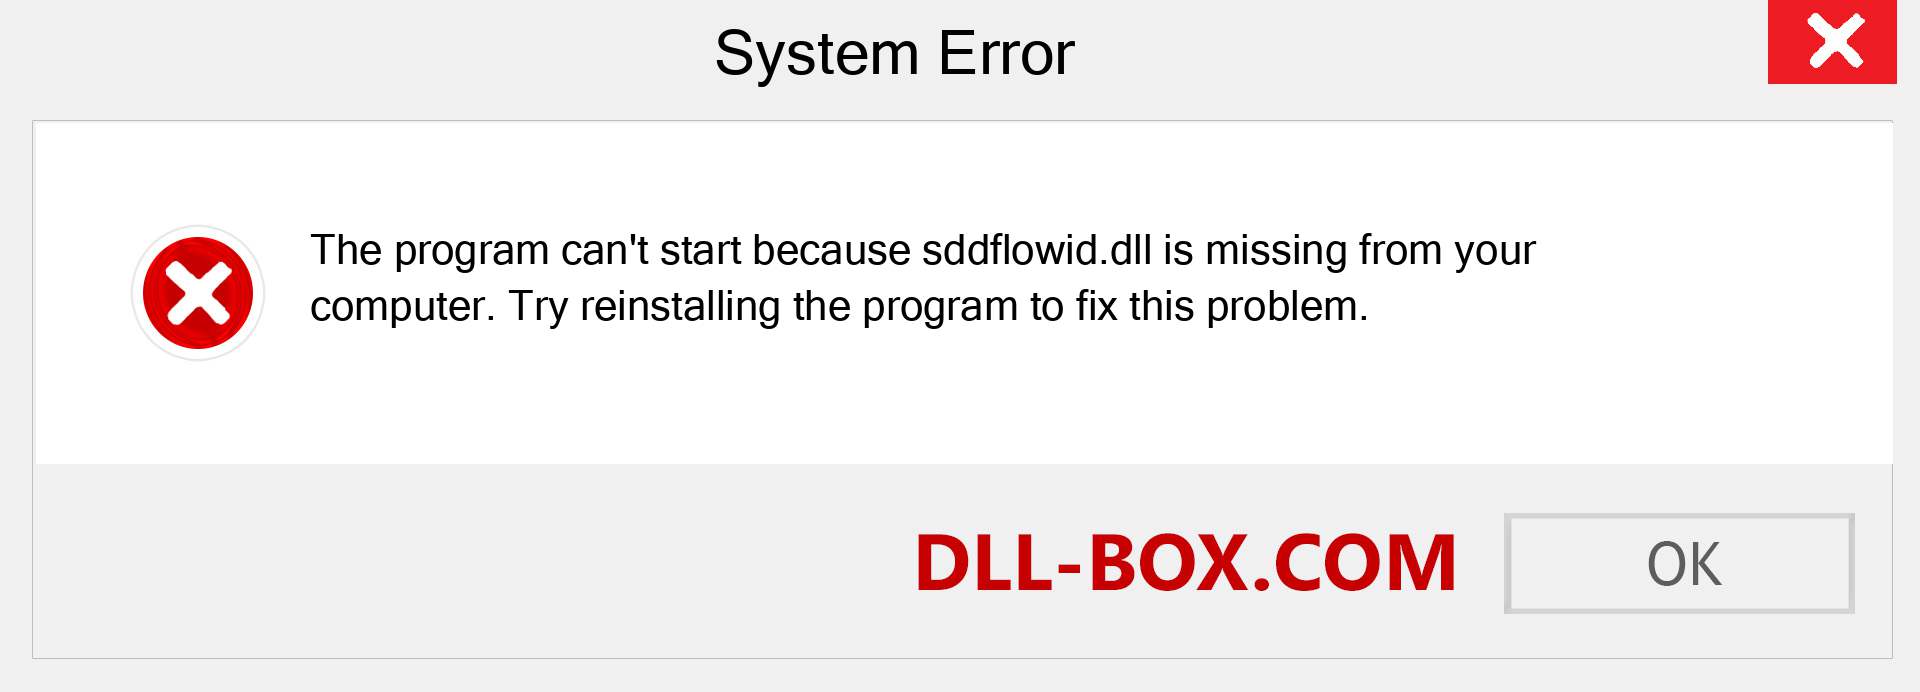  sddflowid.dll file is missing?. Download for Windows 7, 8, 10 - Fix  sddflowid dll Missing Error on Windows, photos, images